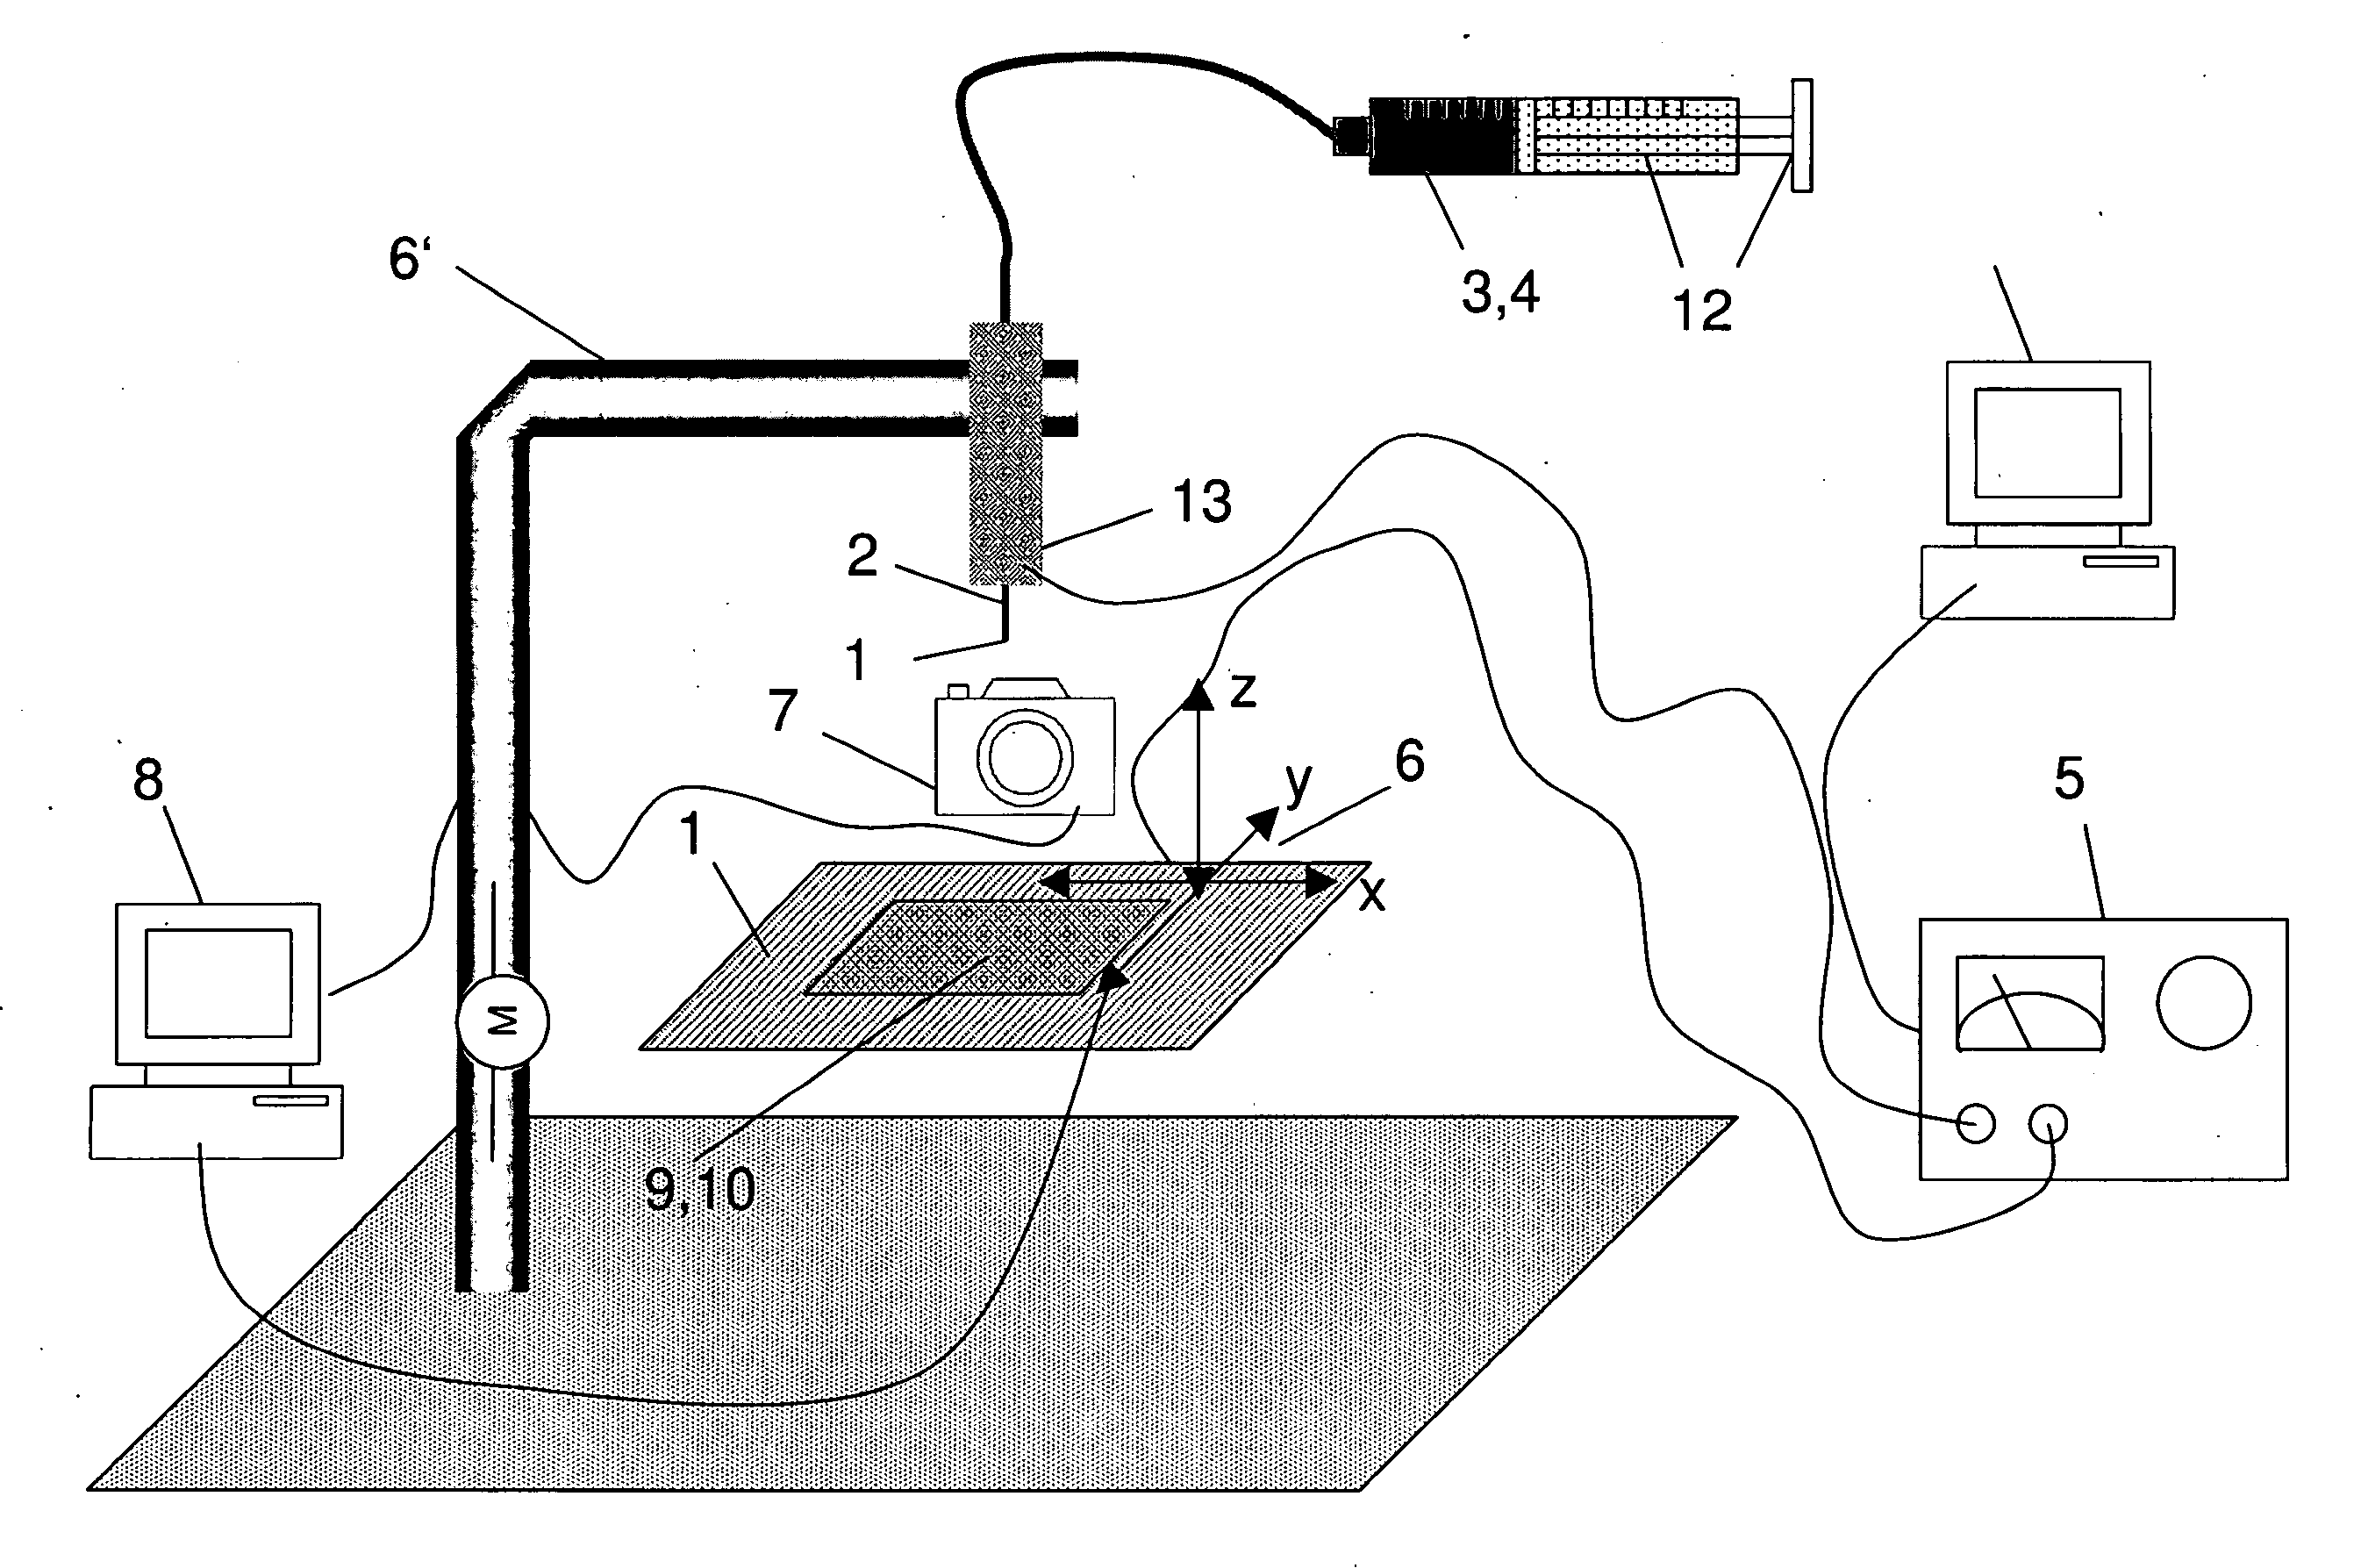 Apparatus and method for producing electrically conducting nanostructures by means of electrospinning